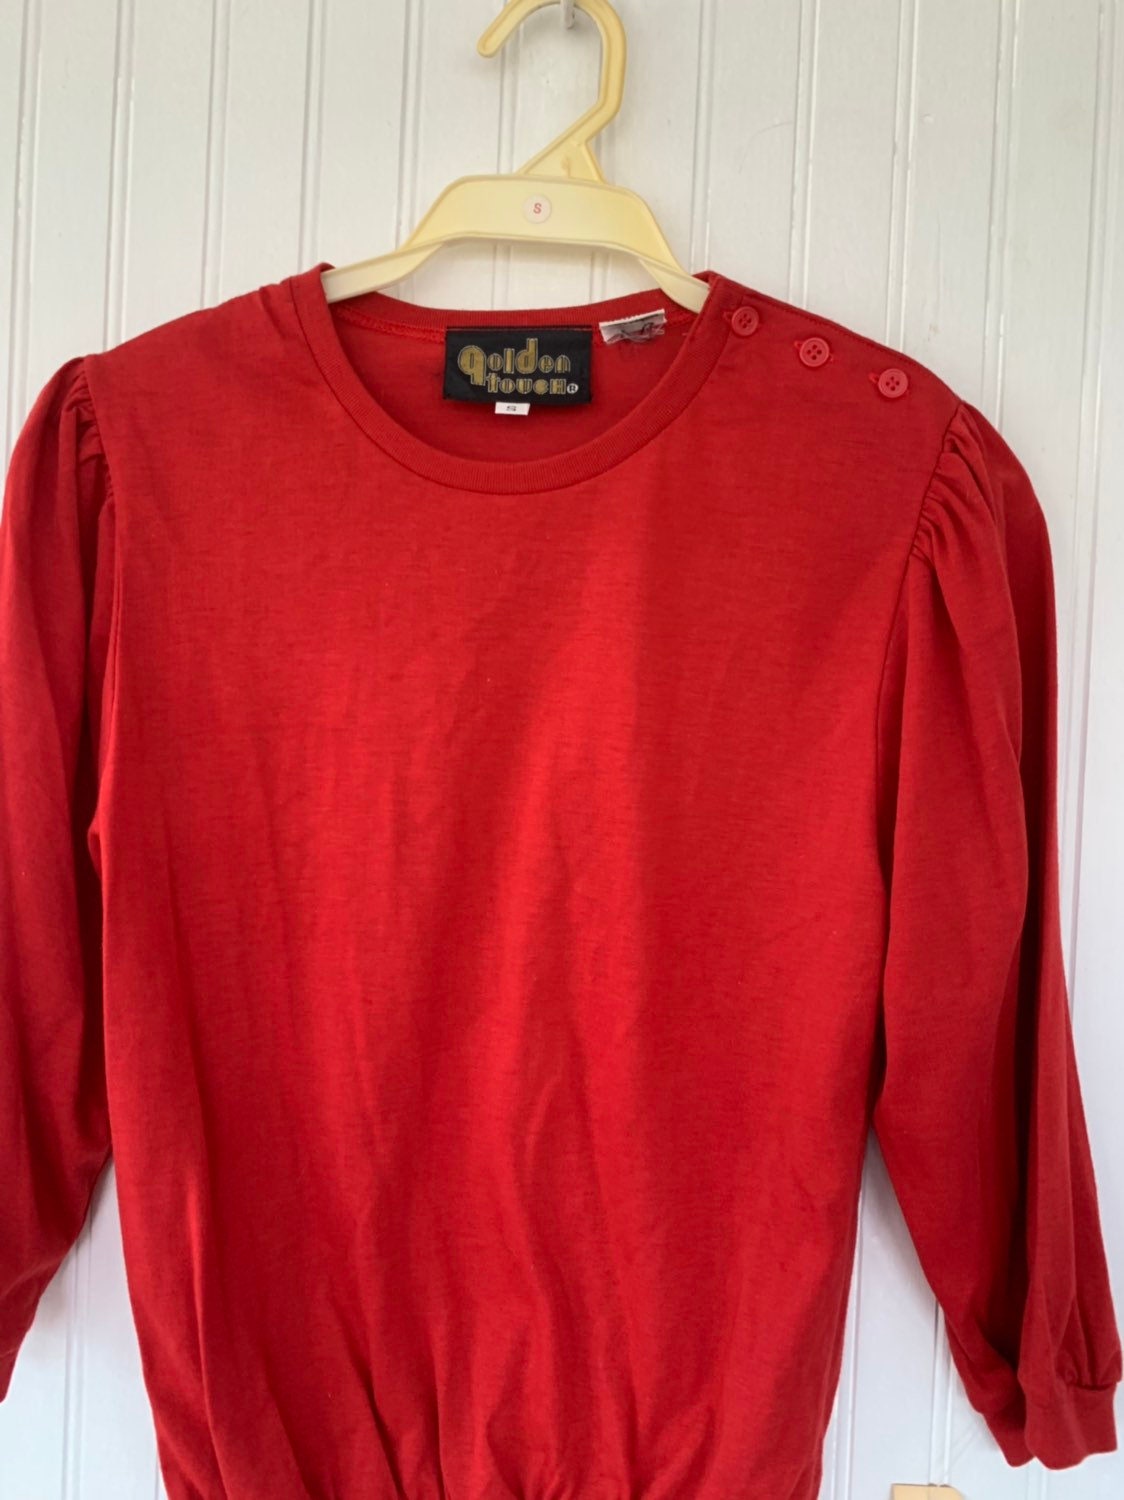 Unique Vintage 70s 80s Bright Red Puff Sleeve Top Shirt Small S xs ...